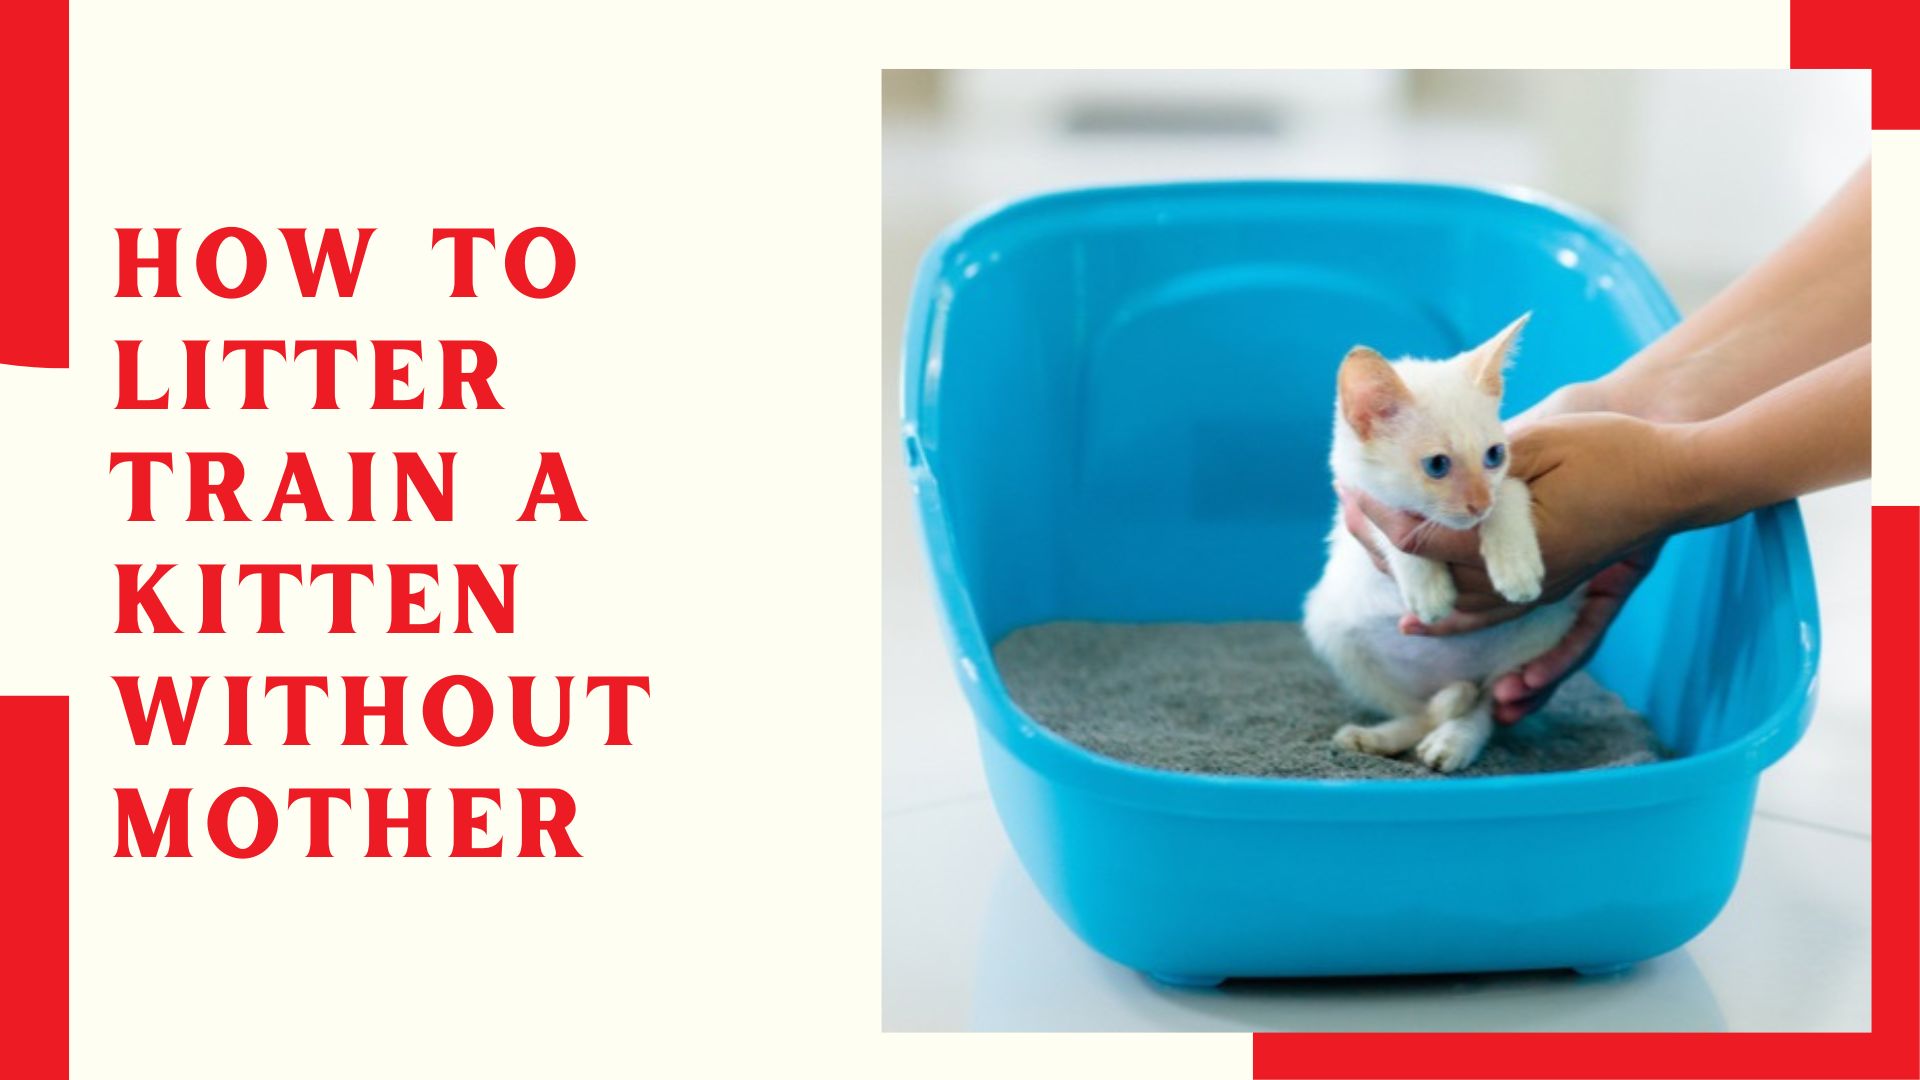 How To Litter Train A Kitten Without Mother